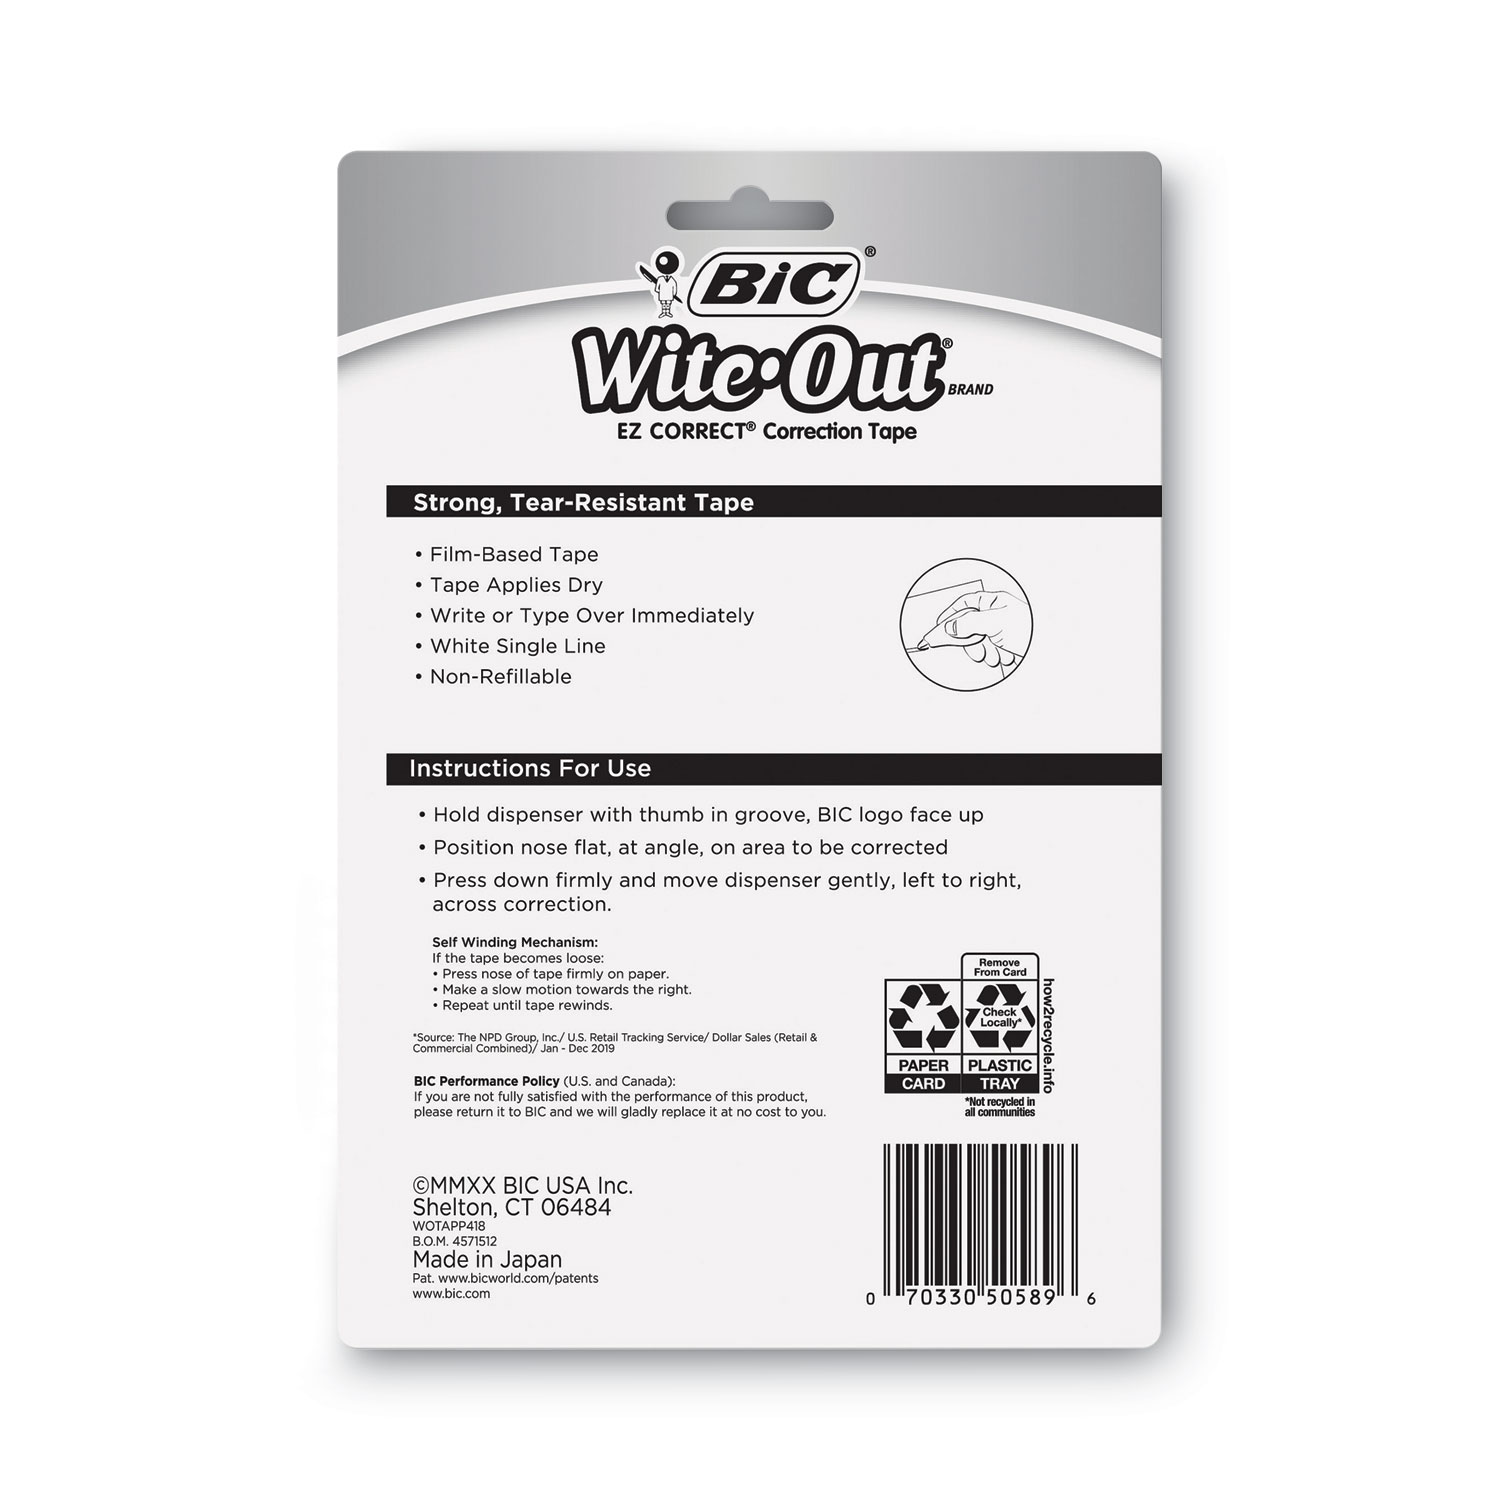 BIC White-Out Brand EZ Correct Correction Tape, 4 Count